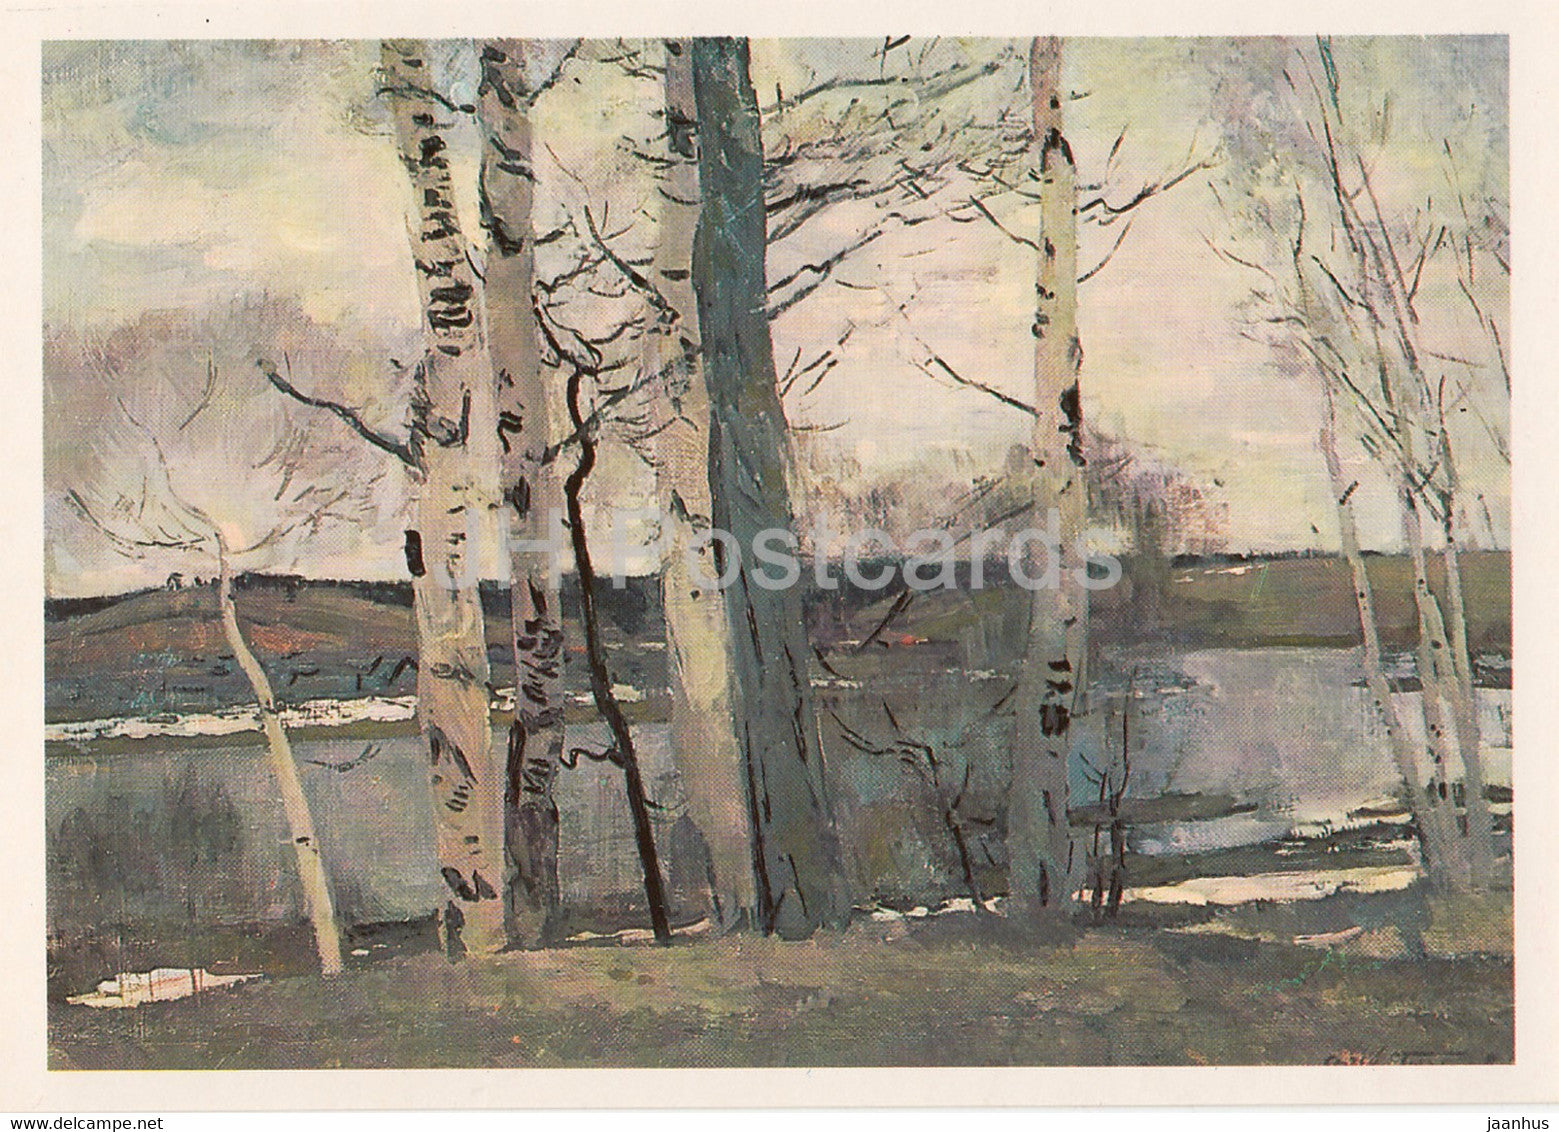 painting by S. Gerasimov - The ice has passed - Russian art - 1982 - Russia USSR - unused - JH Postcards